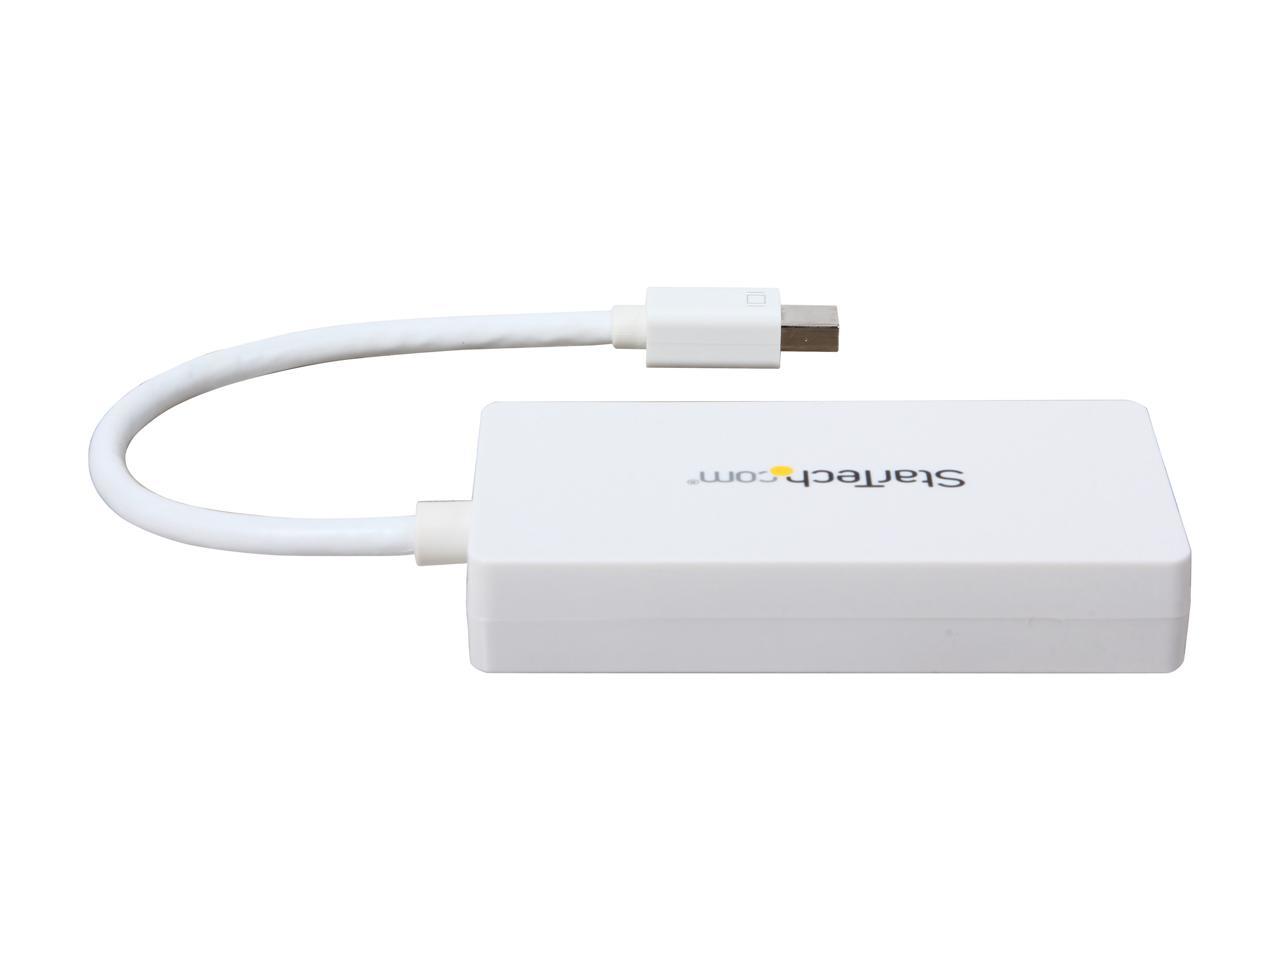 StarTech.com MDP2VGDVHDW Travel A/V Adapter: 3-in-1 Mini DisplayPort to VGA DVI or HDMI Converter - White - image 5 of 6